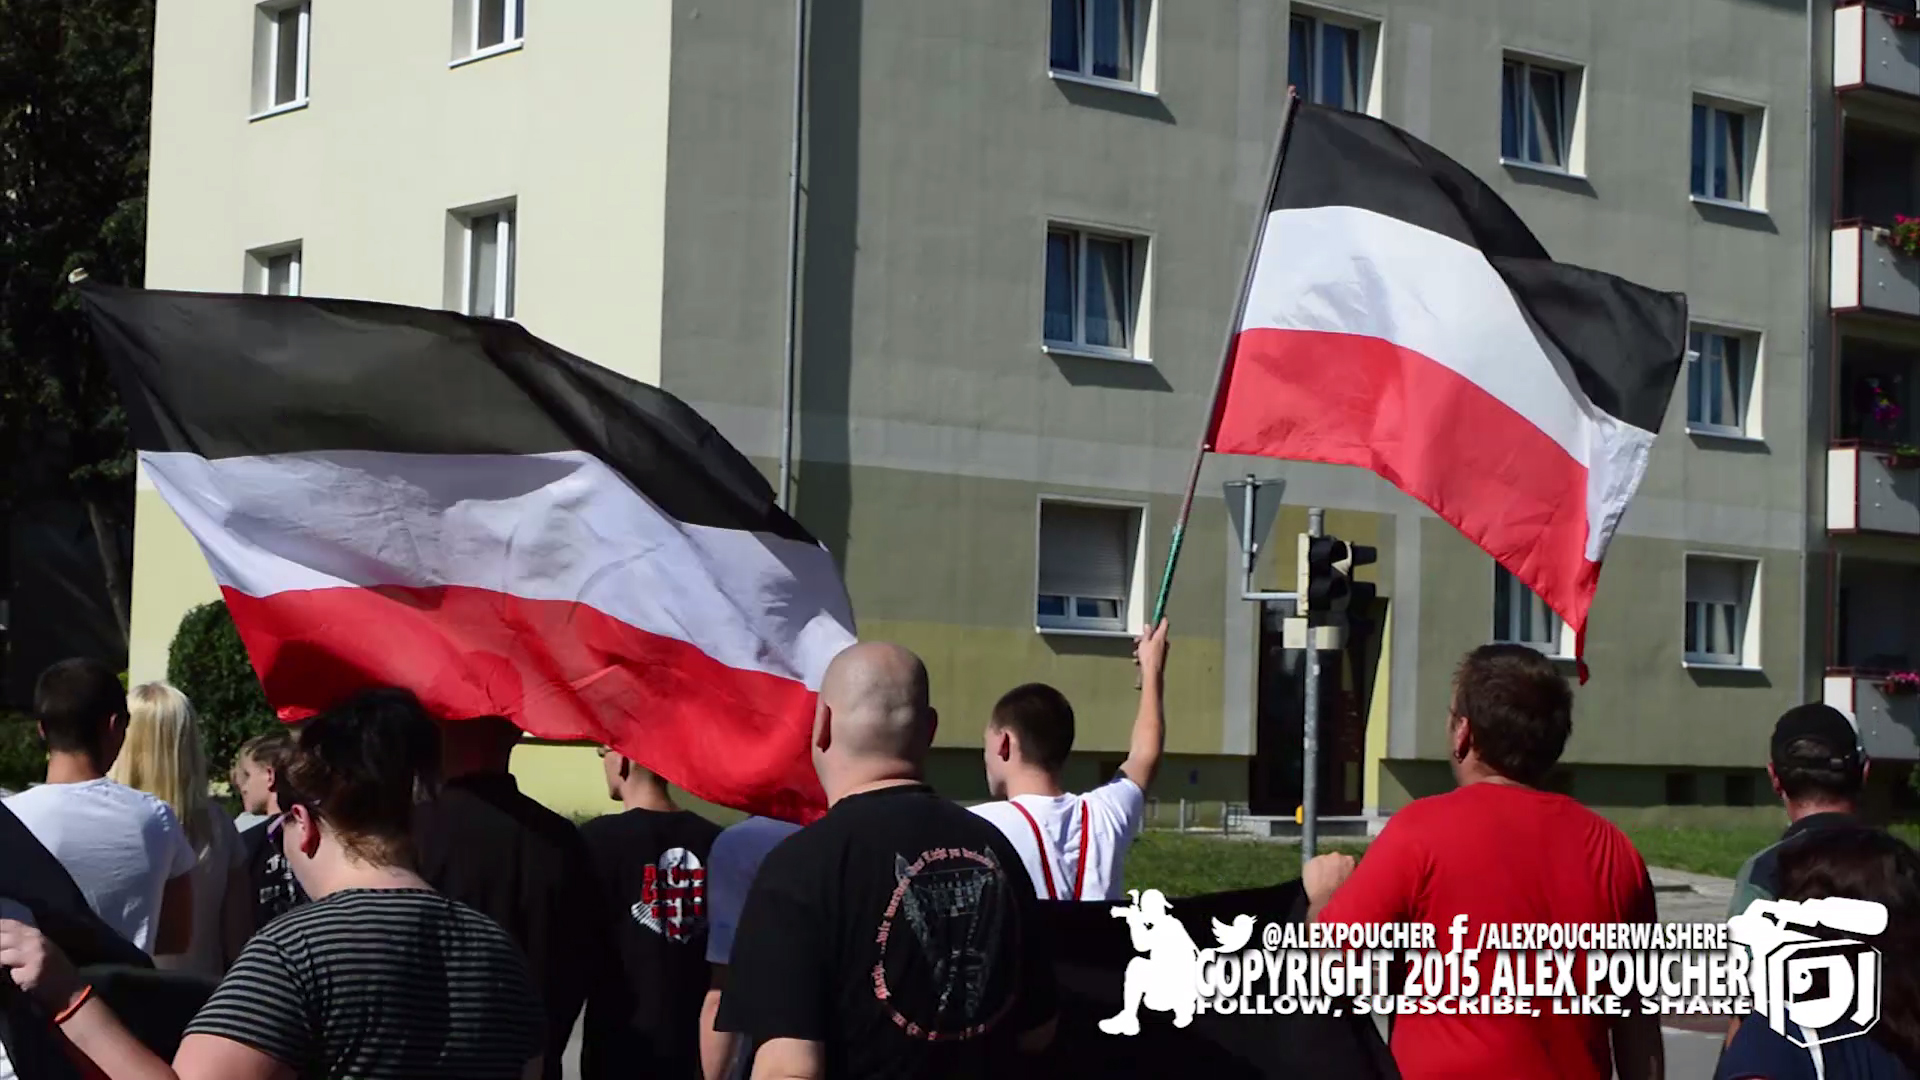 Exclusive Video: #Hoyerswerda Far Right Nationalists Take To The Streets